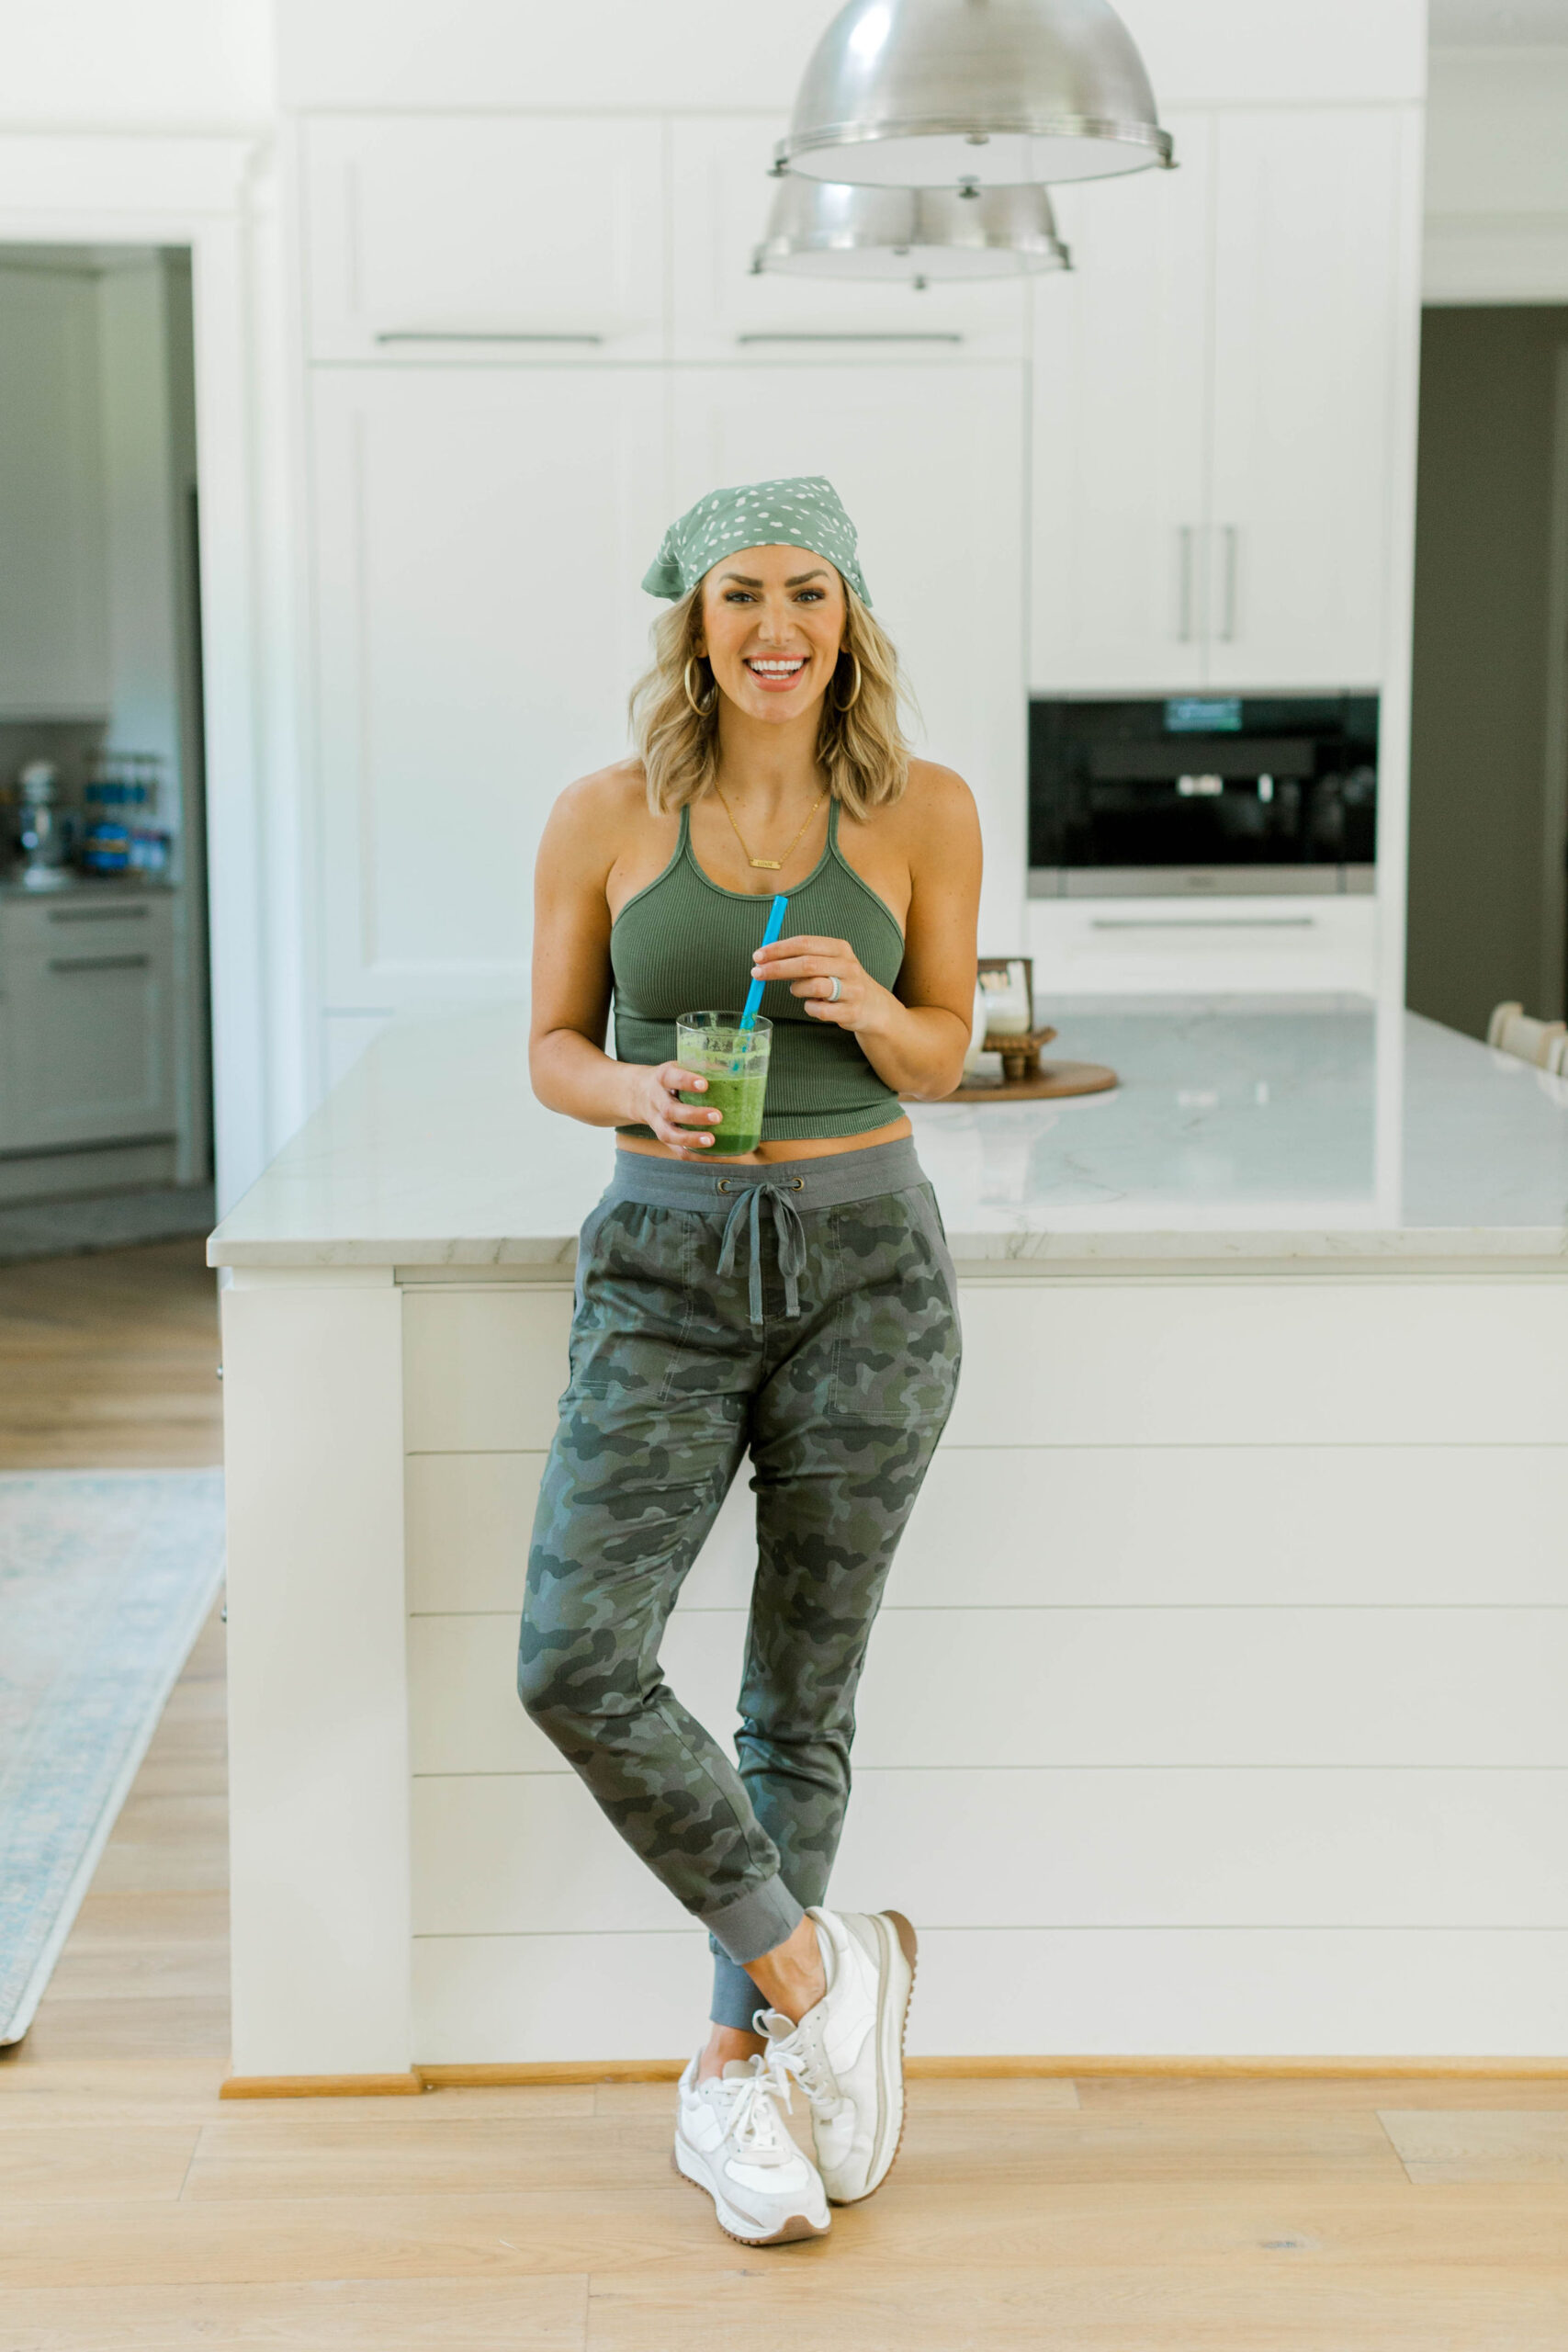 Friday Finds: Fitness Products for Her - Eva Shockey